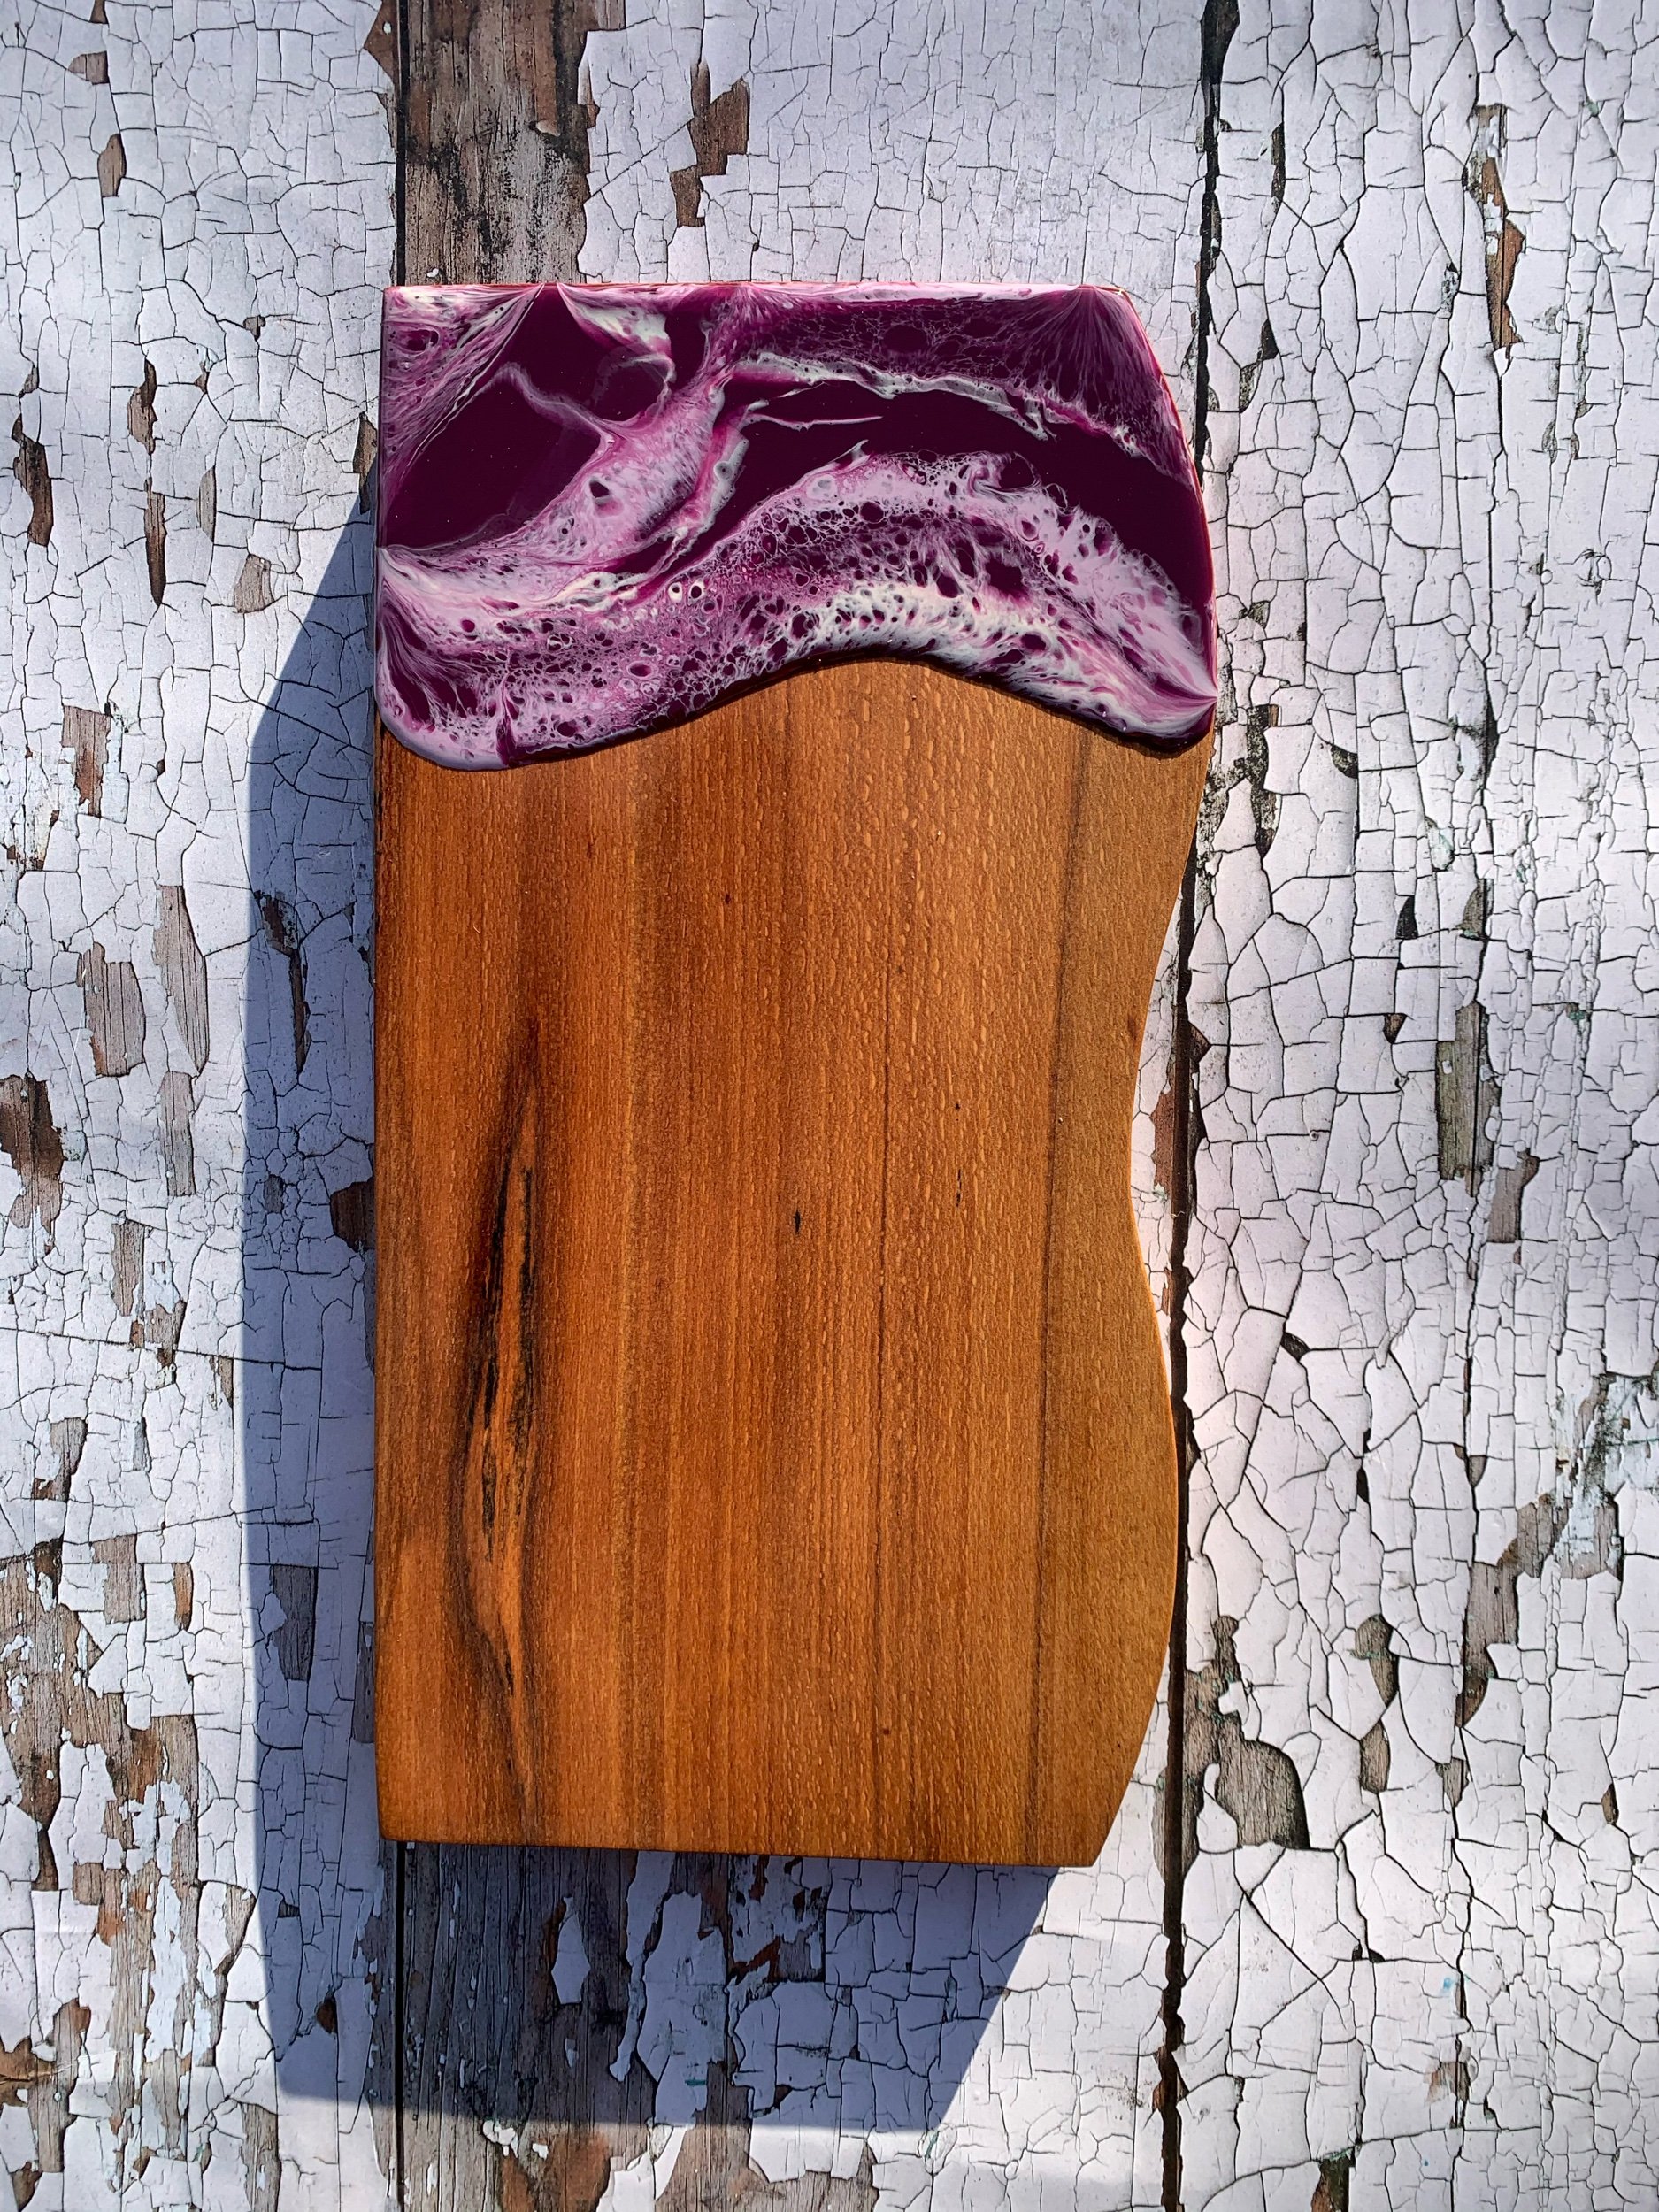 Handcrafted solid beech wavy edged cheese board with resin flow art by resin artist Fiona Scott